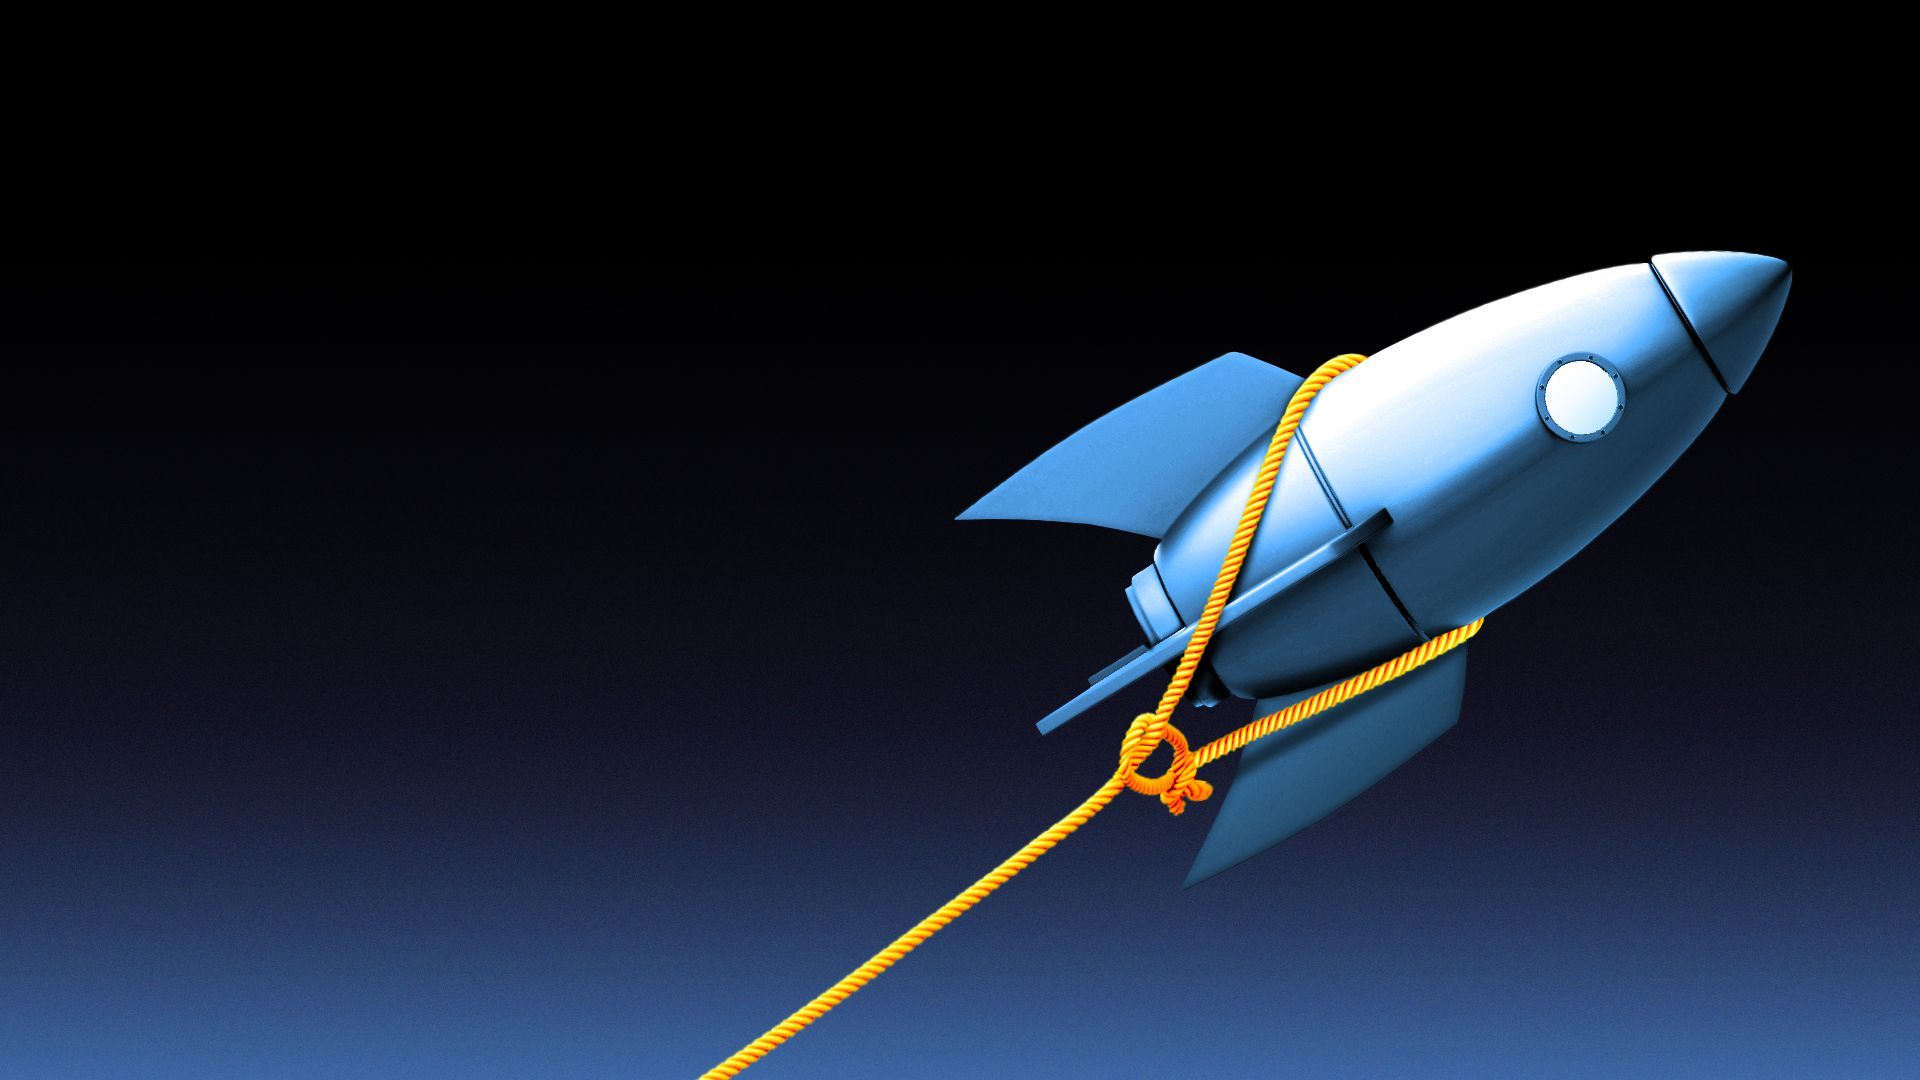 Illustration of a rocket ship being pulled back by a lasso